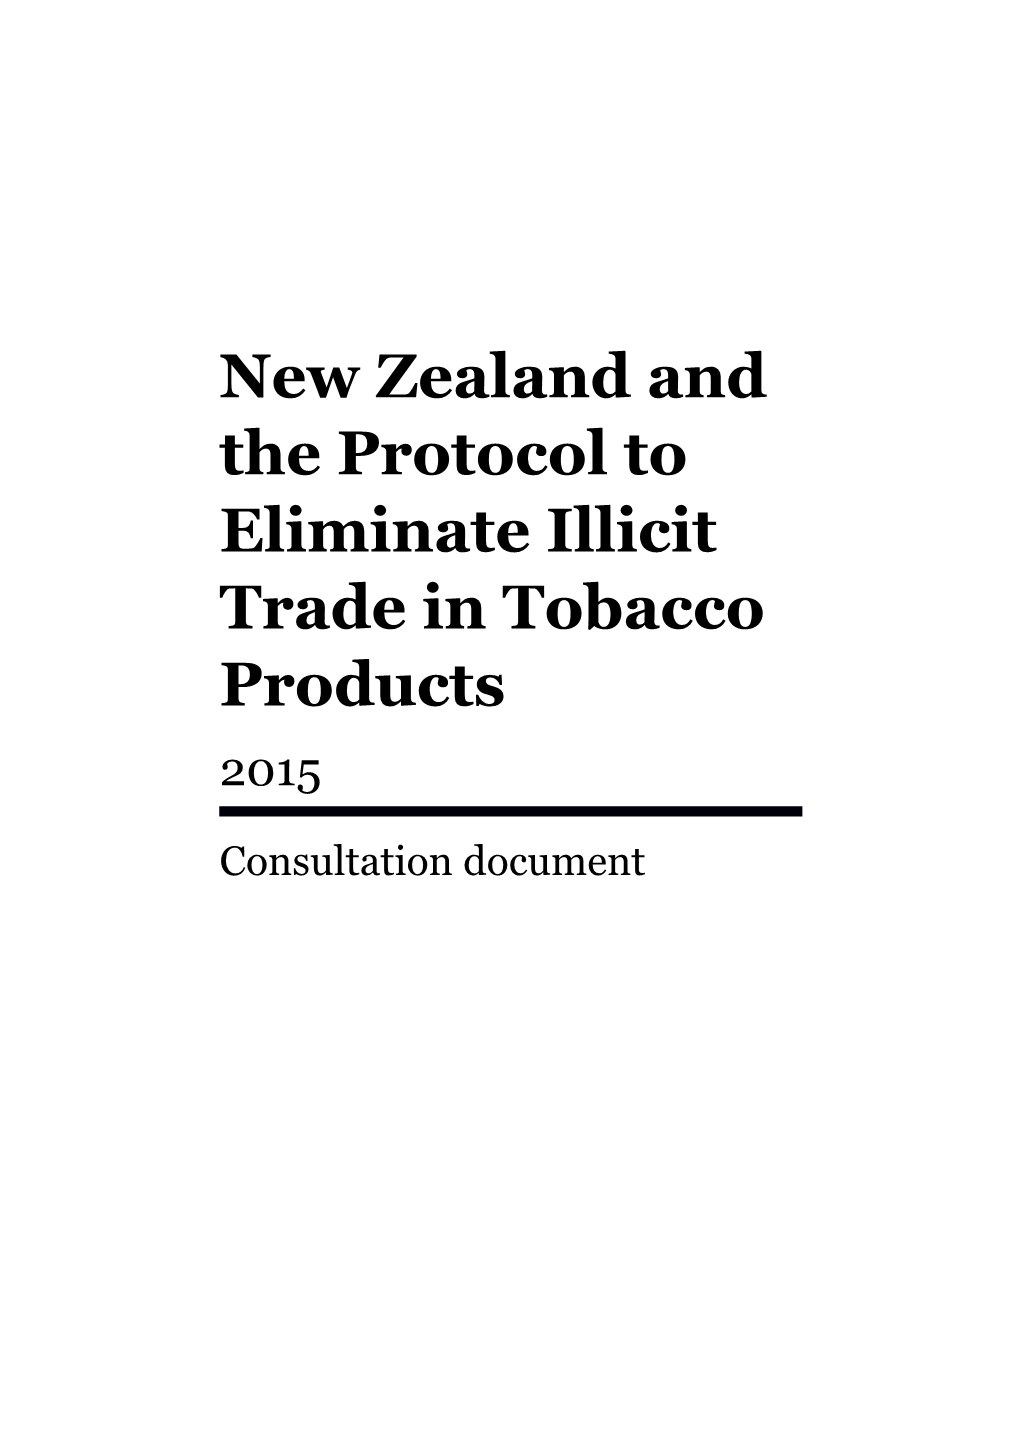 New Zealand and the Protocol to Eliminate Illicit Trade in Tobacco Products Consultation